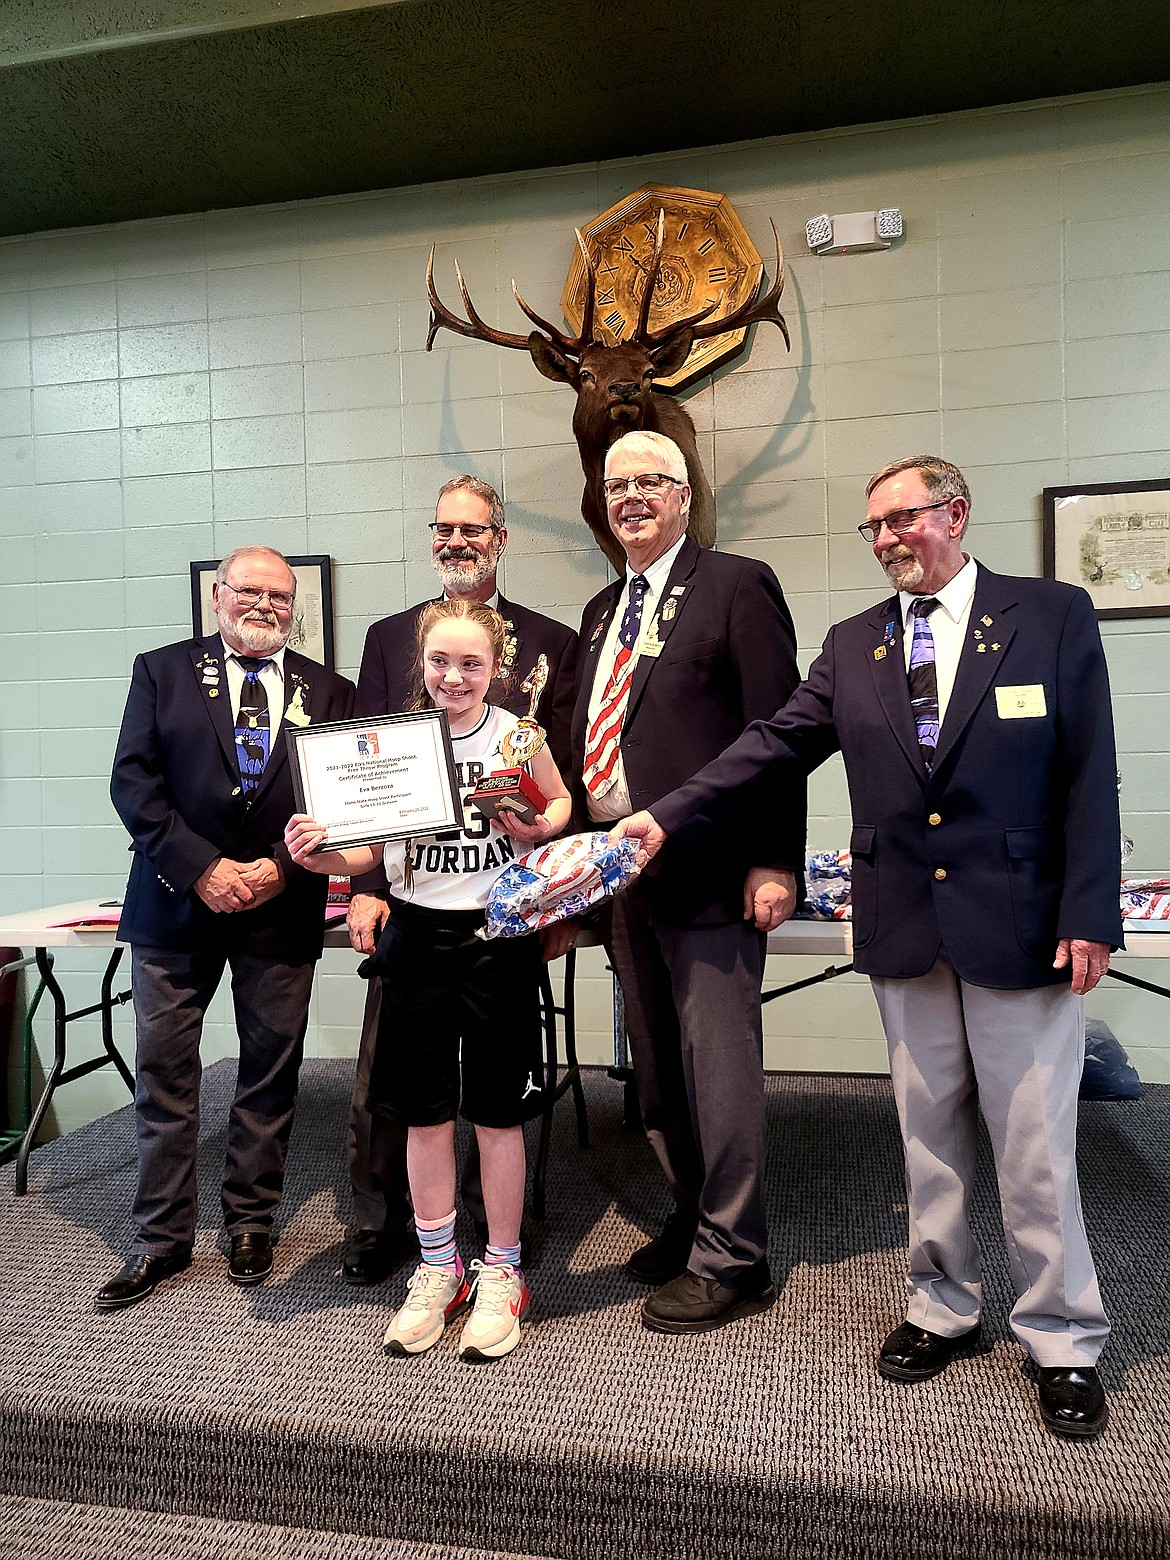 Courtesy photo
Eva Berzoza of Coeur d'Alene, a fifth-grader at Fernan Stem Academy, placed third in the girls 10-11 age division at the recent state Elks Hoop Shoot at Syringa Middle School in Caldwell.